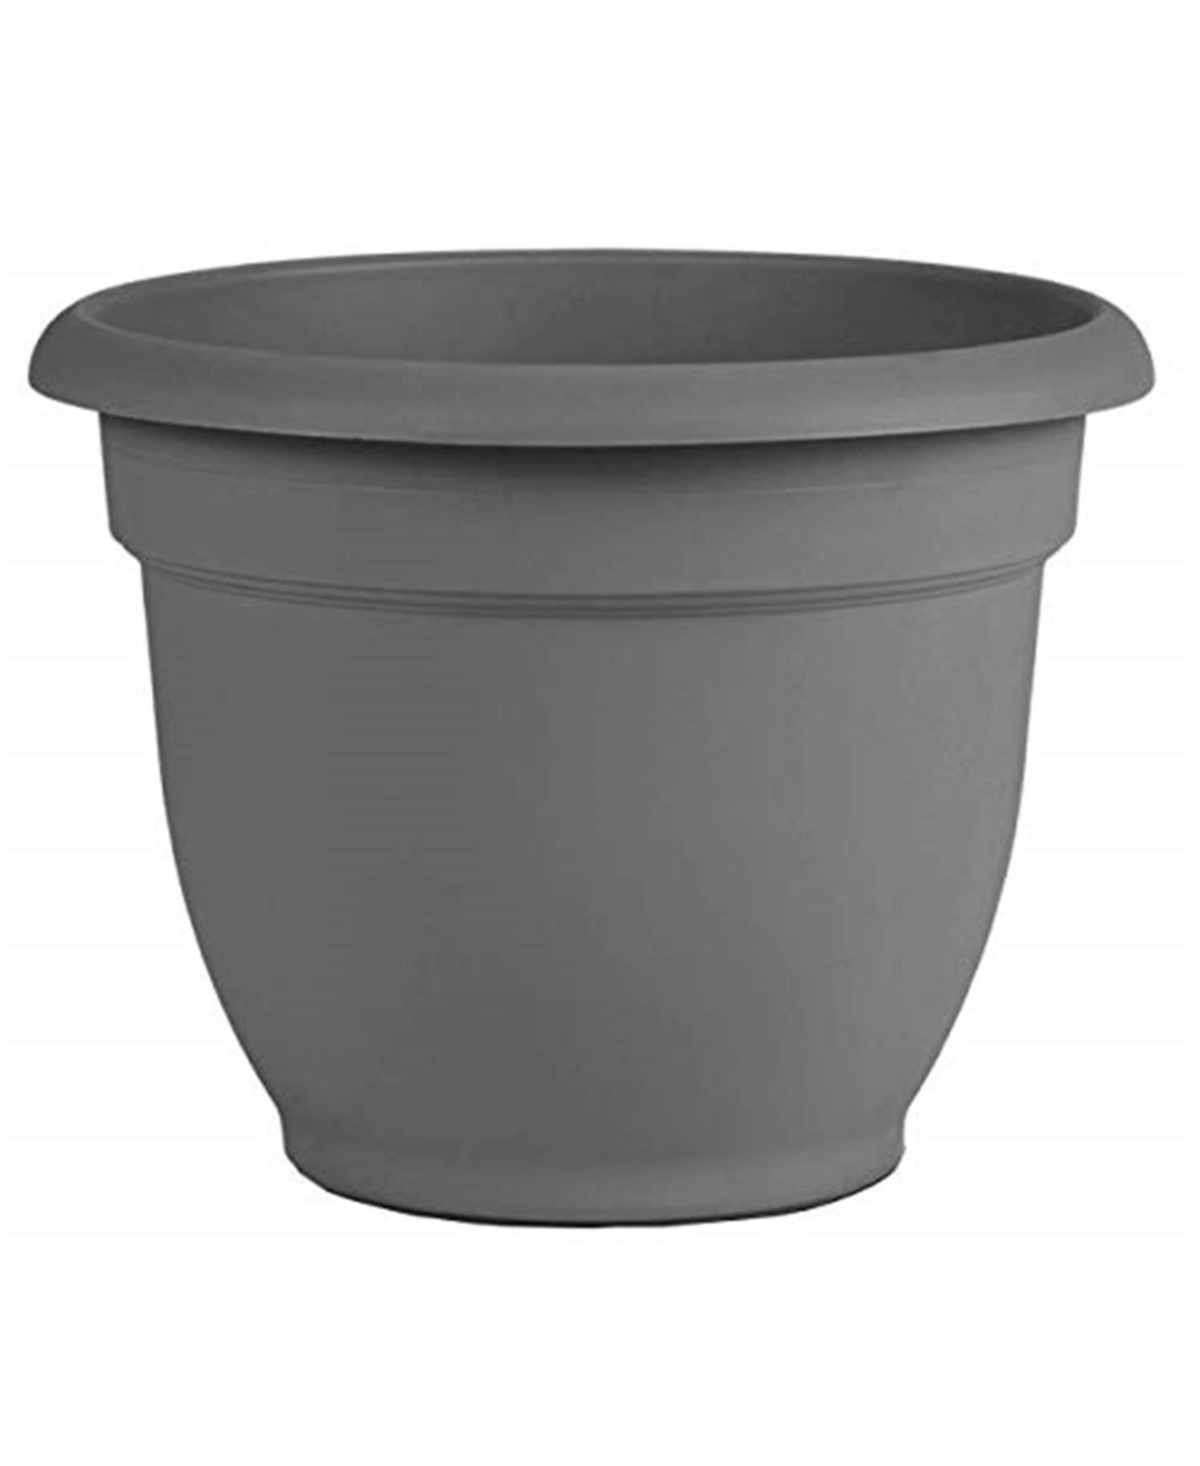 AP12908 Ariana Planter with Self-Watering Disk, Charcoal - 12 inches - Charcoal